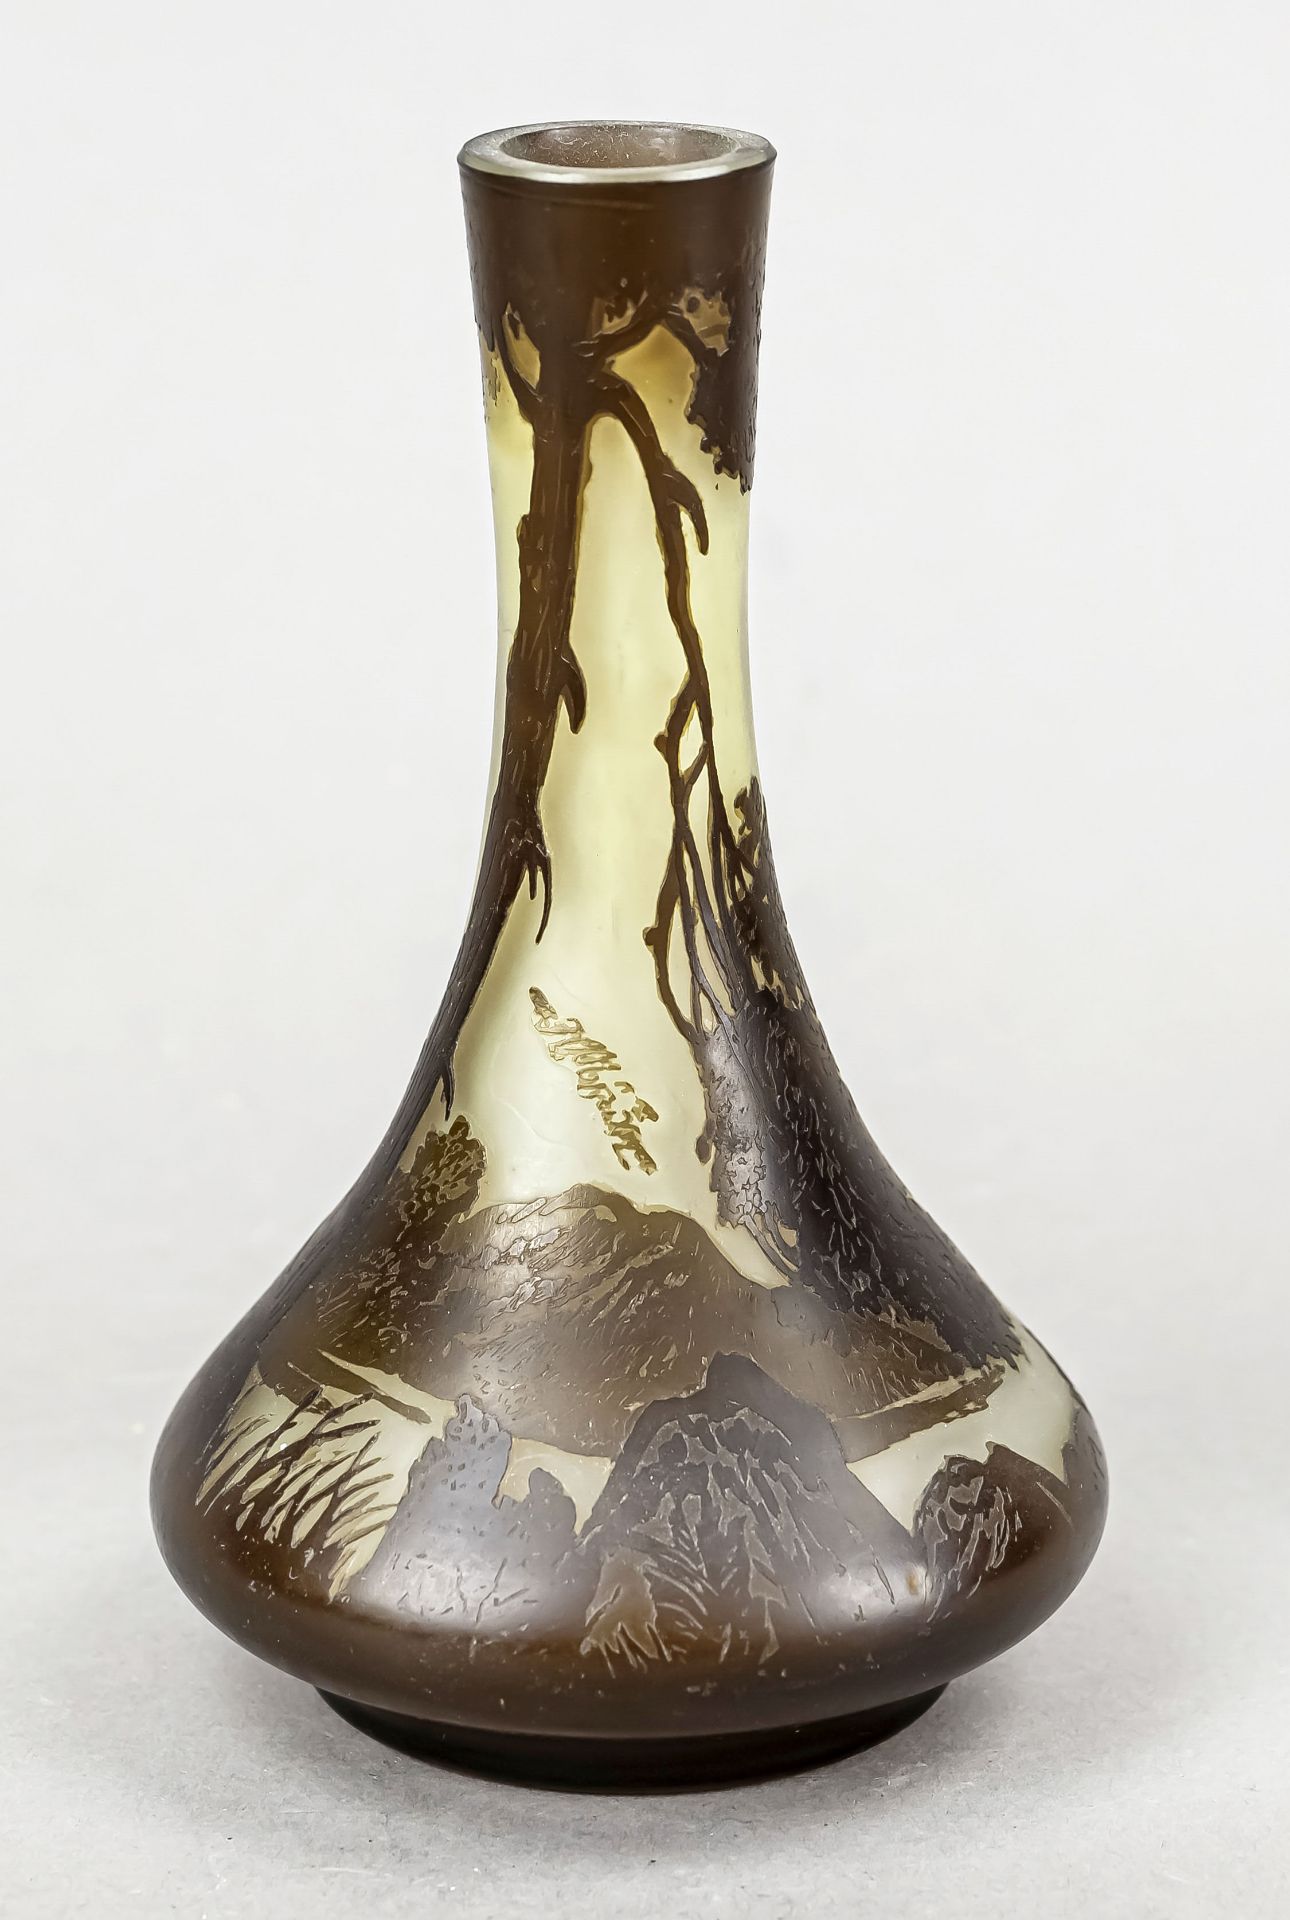 Art Nouveau vase, probably Russia, c. 1900, round stand, bulbous body, slender neck, clear glass,